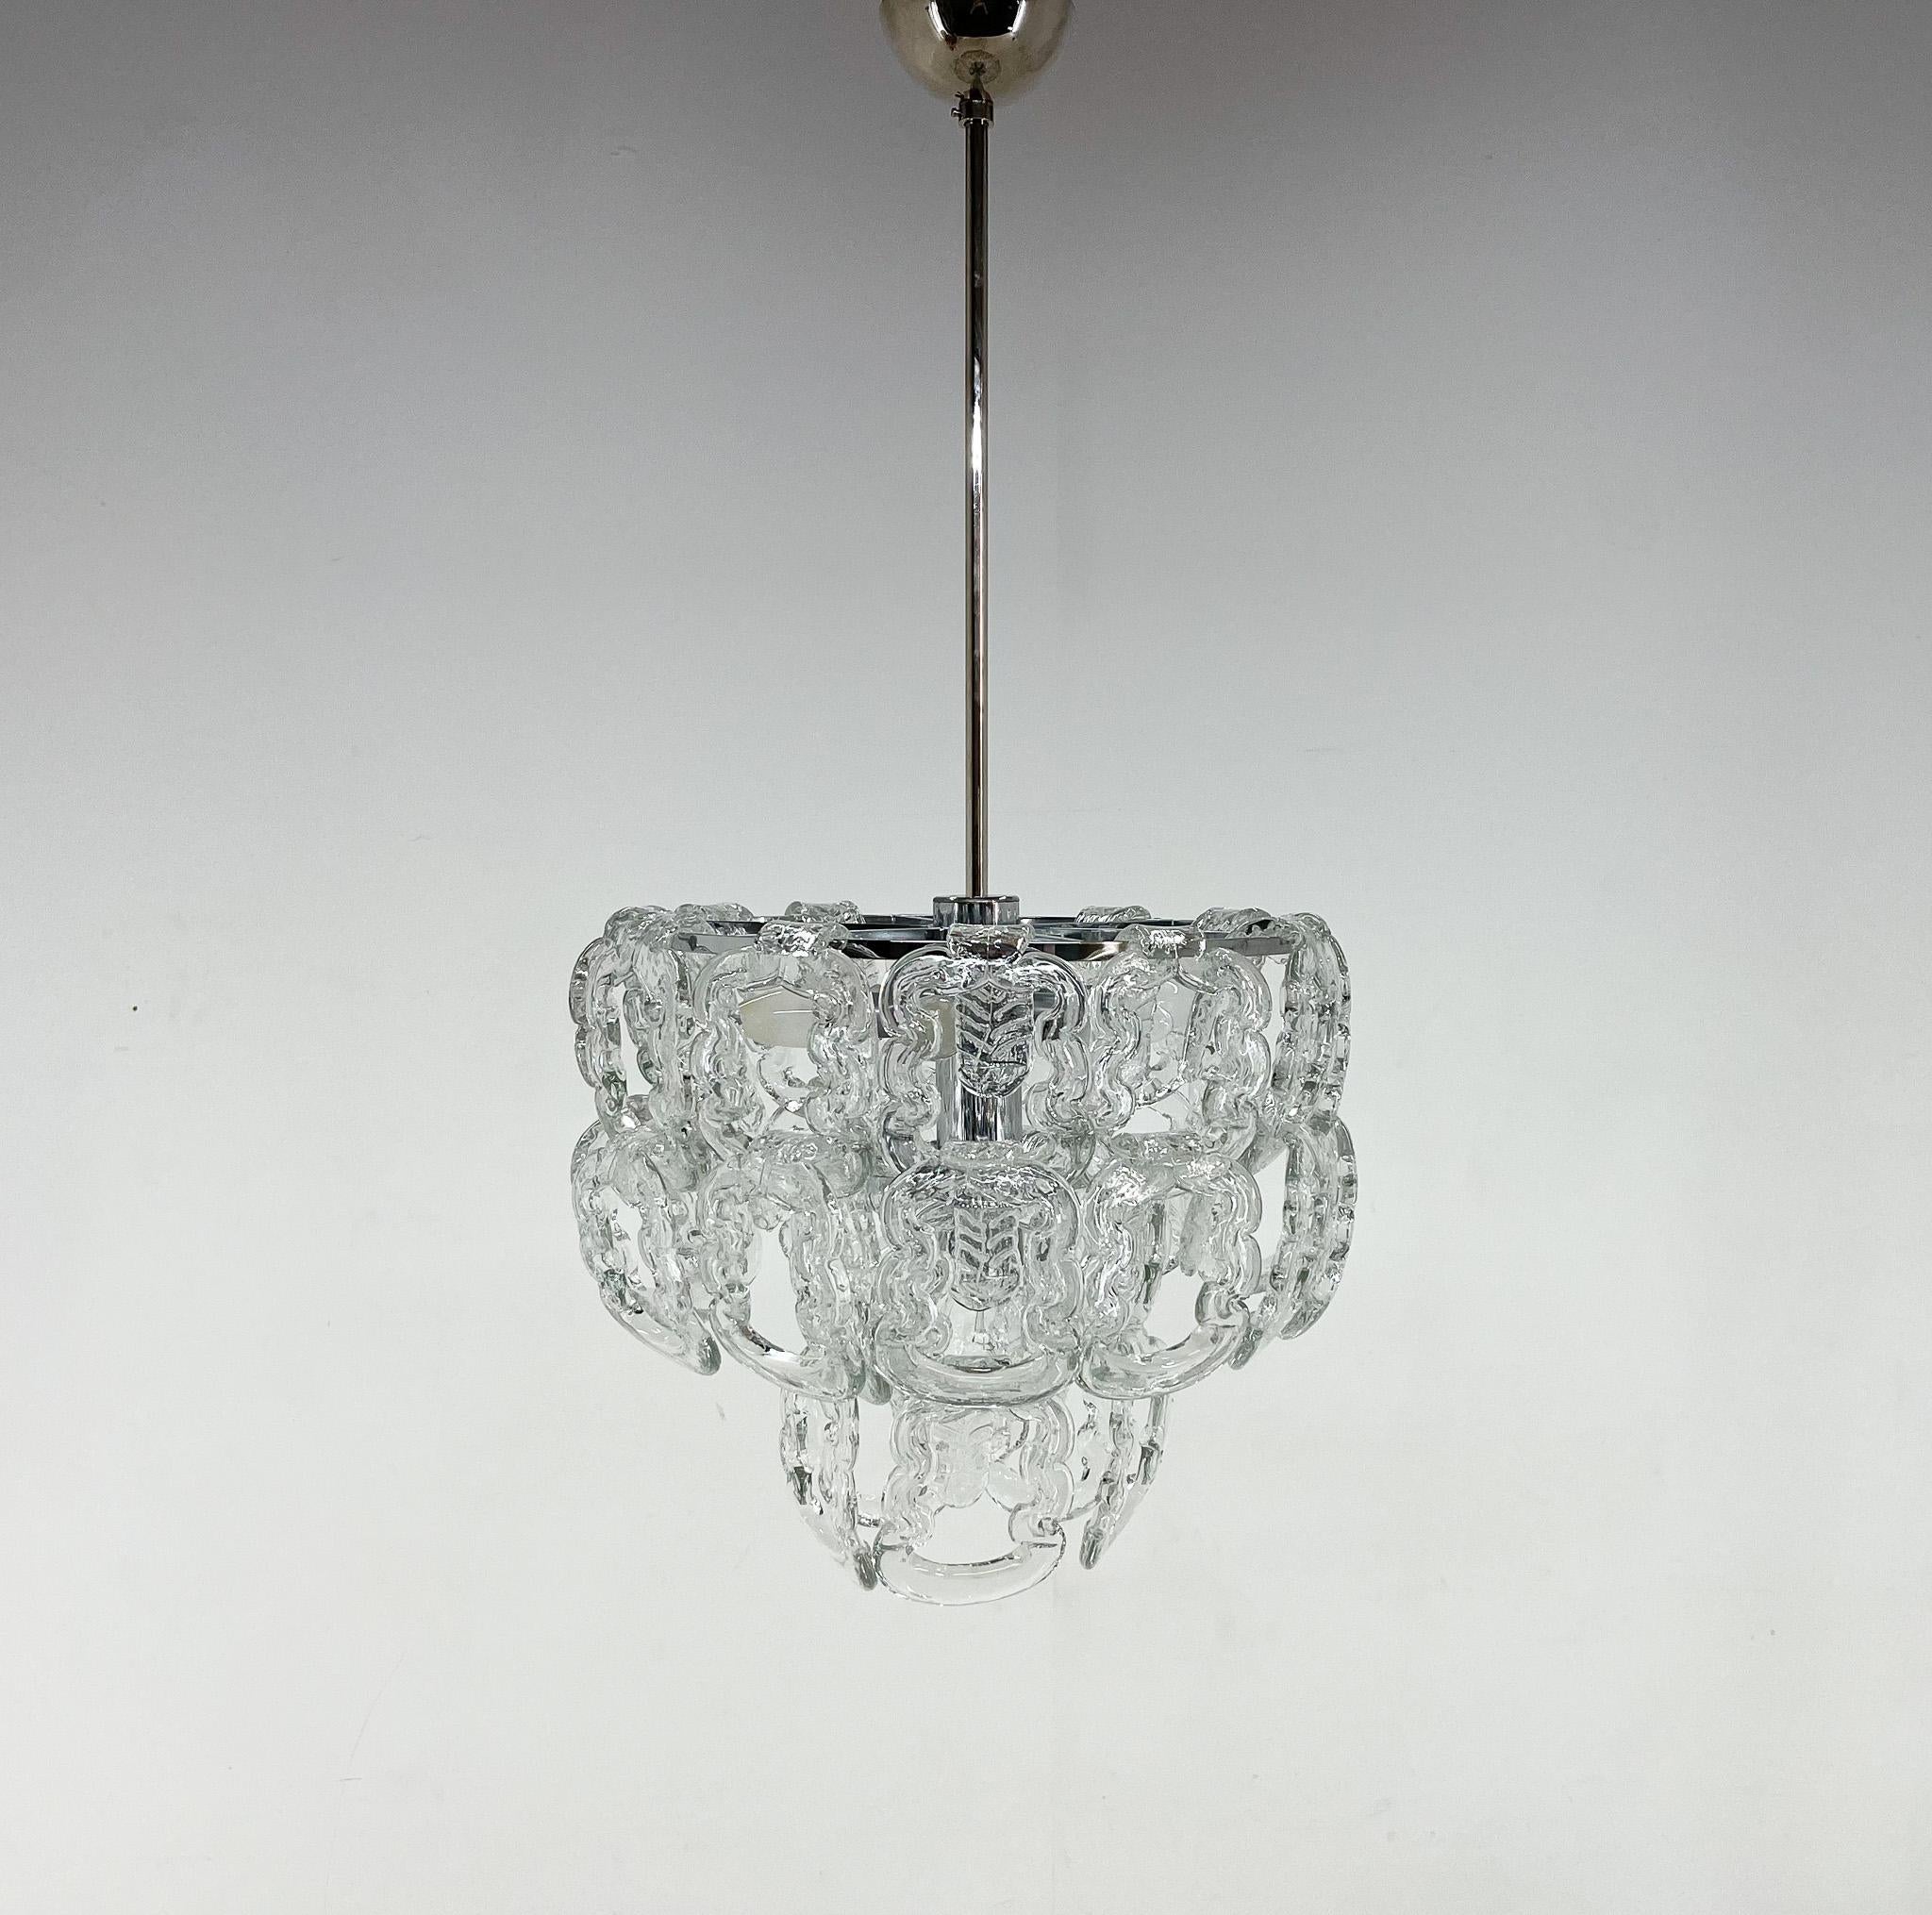 Vintage Murano glass chandelier with chrome frame. Designed by Angelo Mangiarotti for Vistosi. New wiring.